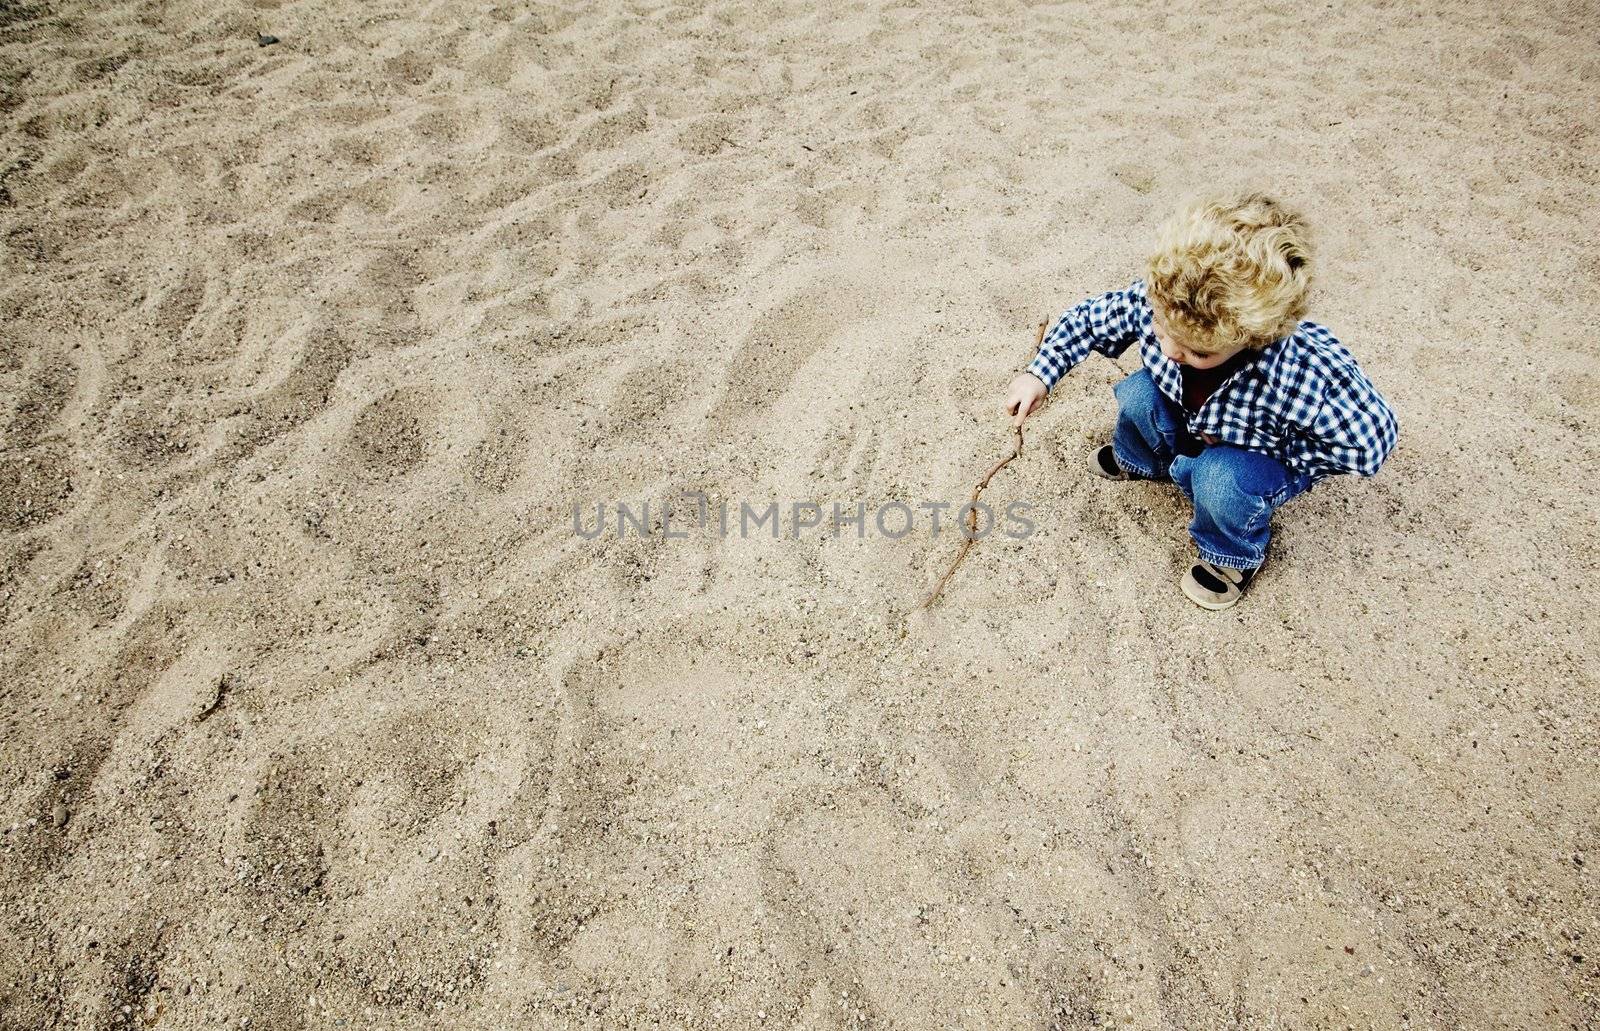 Little boy with a stick plays in a large patch of rough sand.